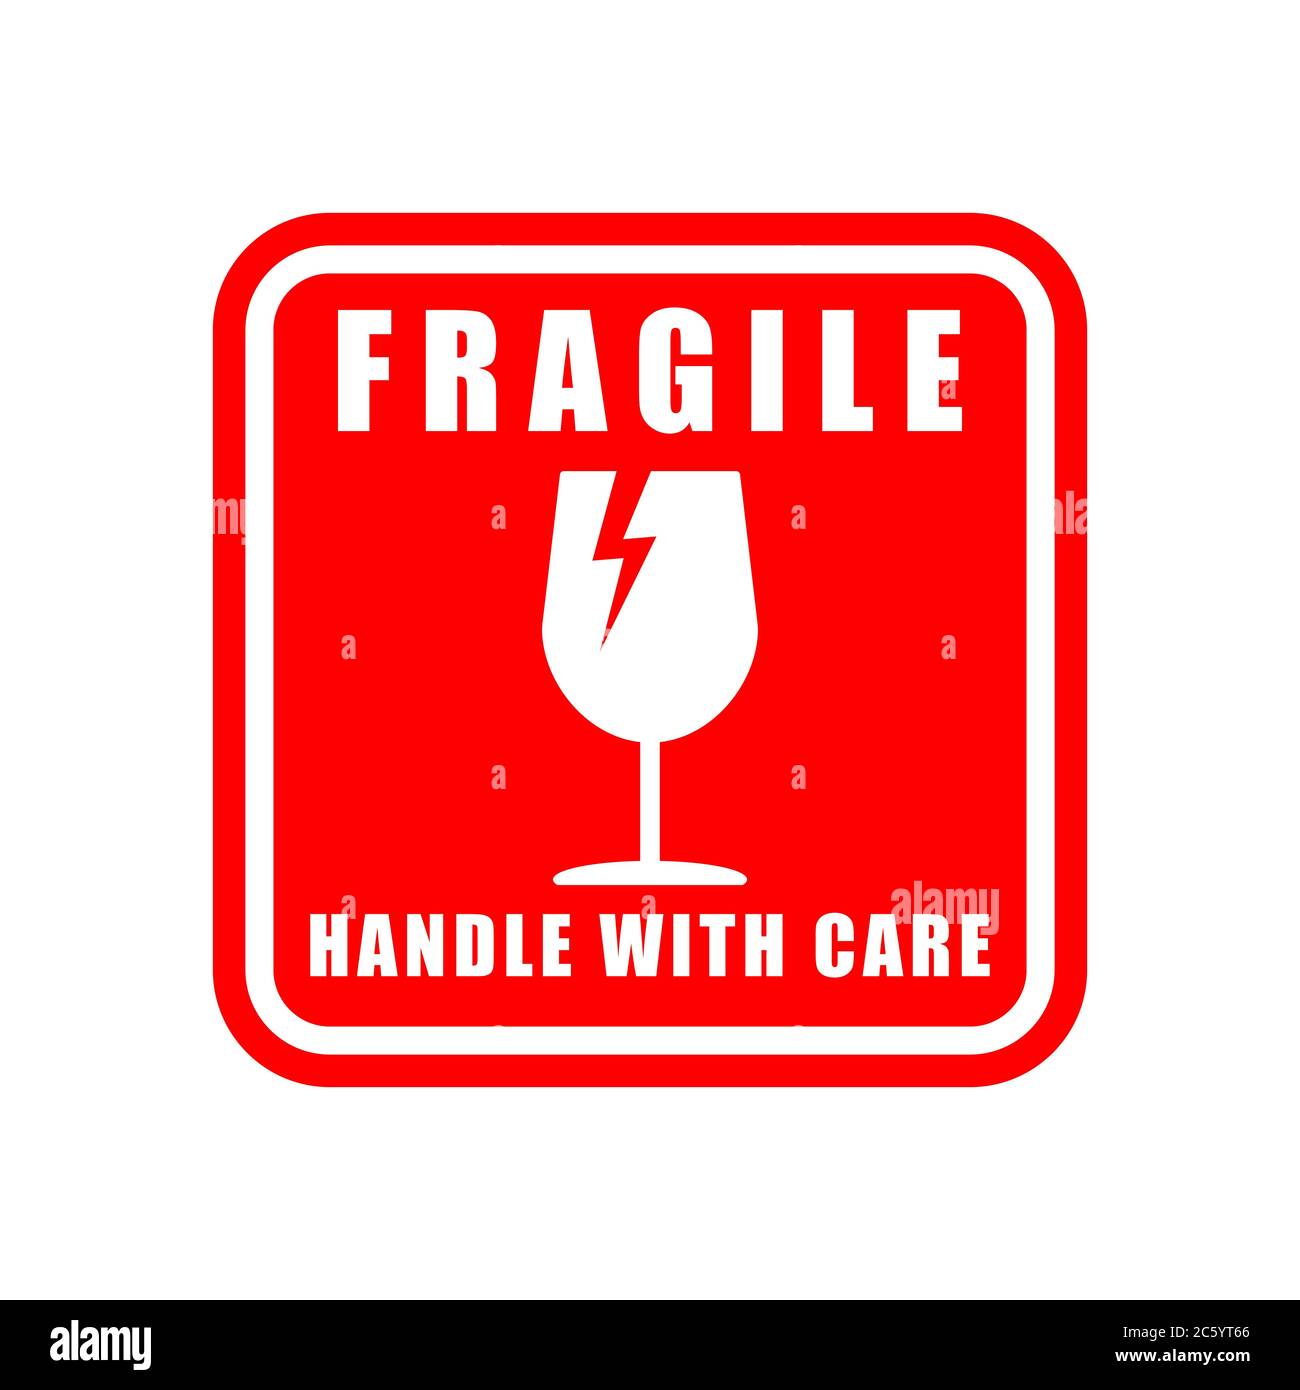 Fragile sticker icon symbol. Handle with care logo sign. Keep dry, This way up. Vector illustration image. Isolated on white background. Stock Vector